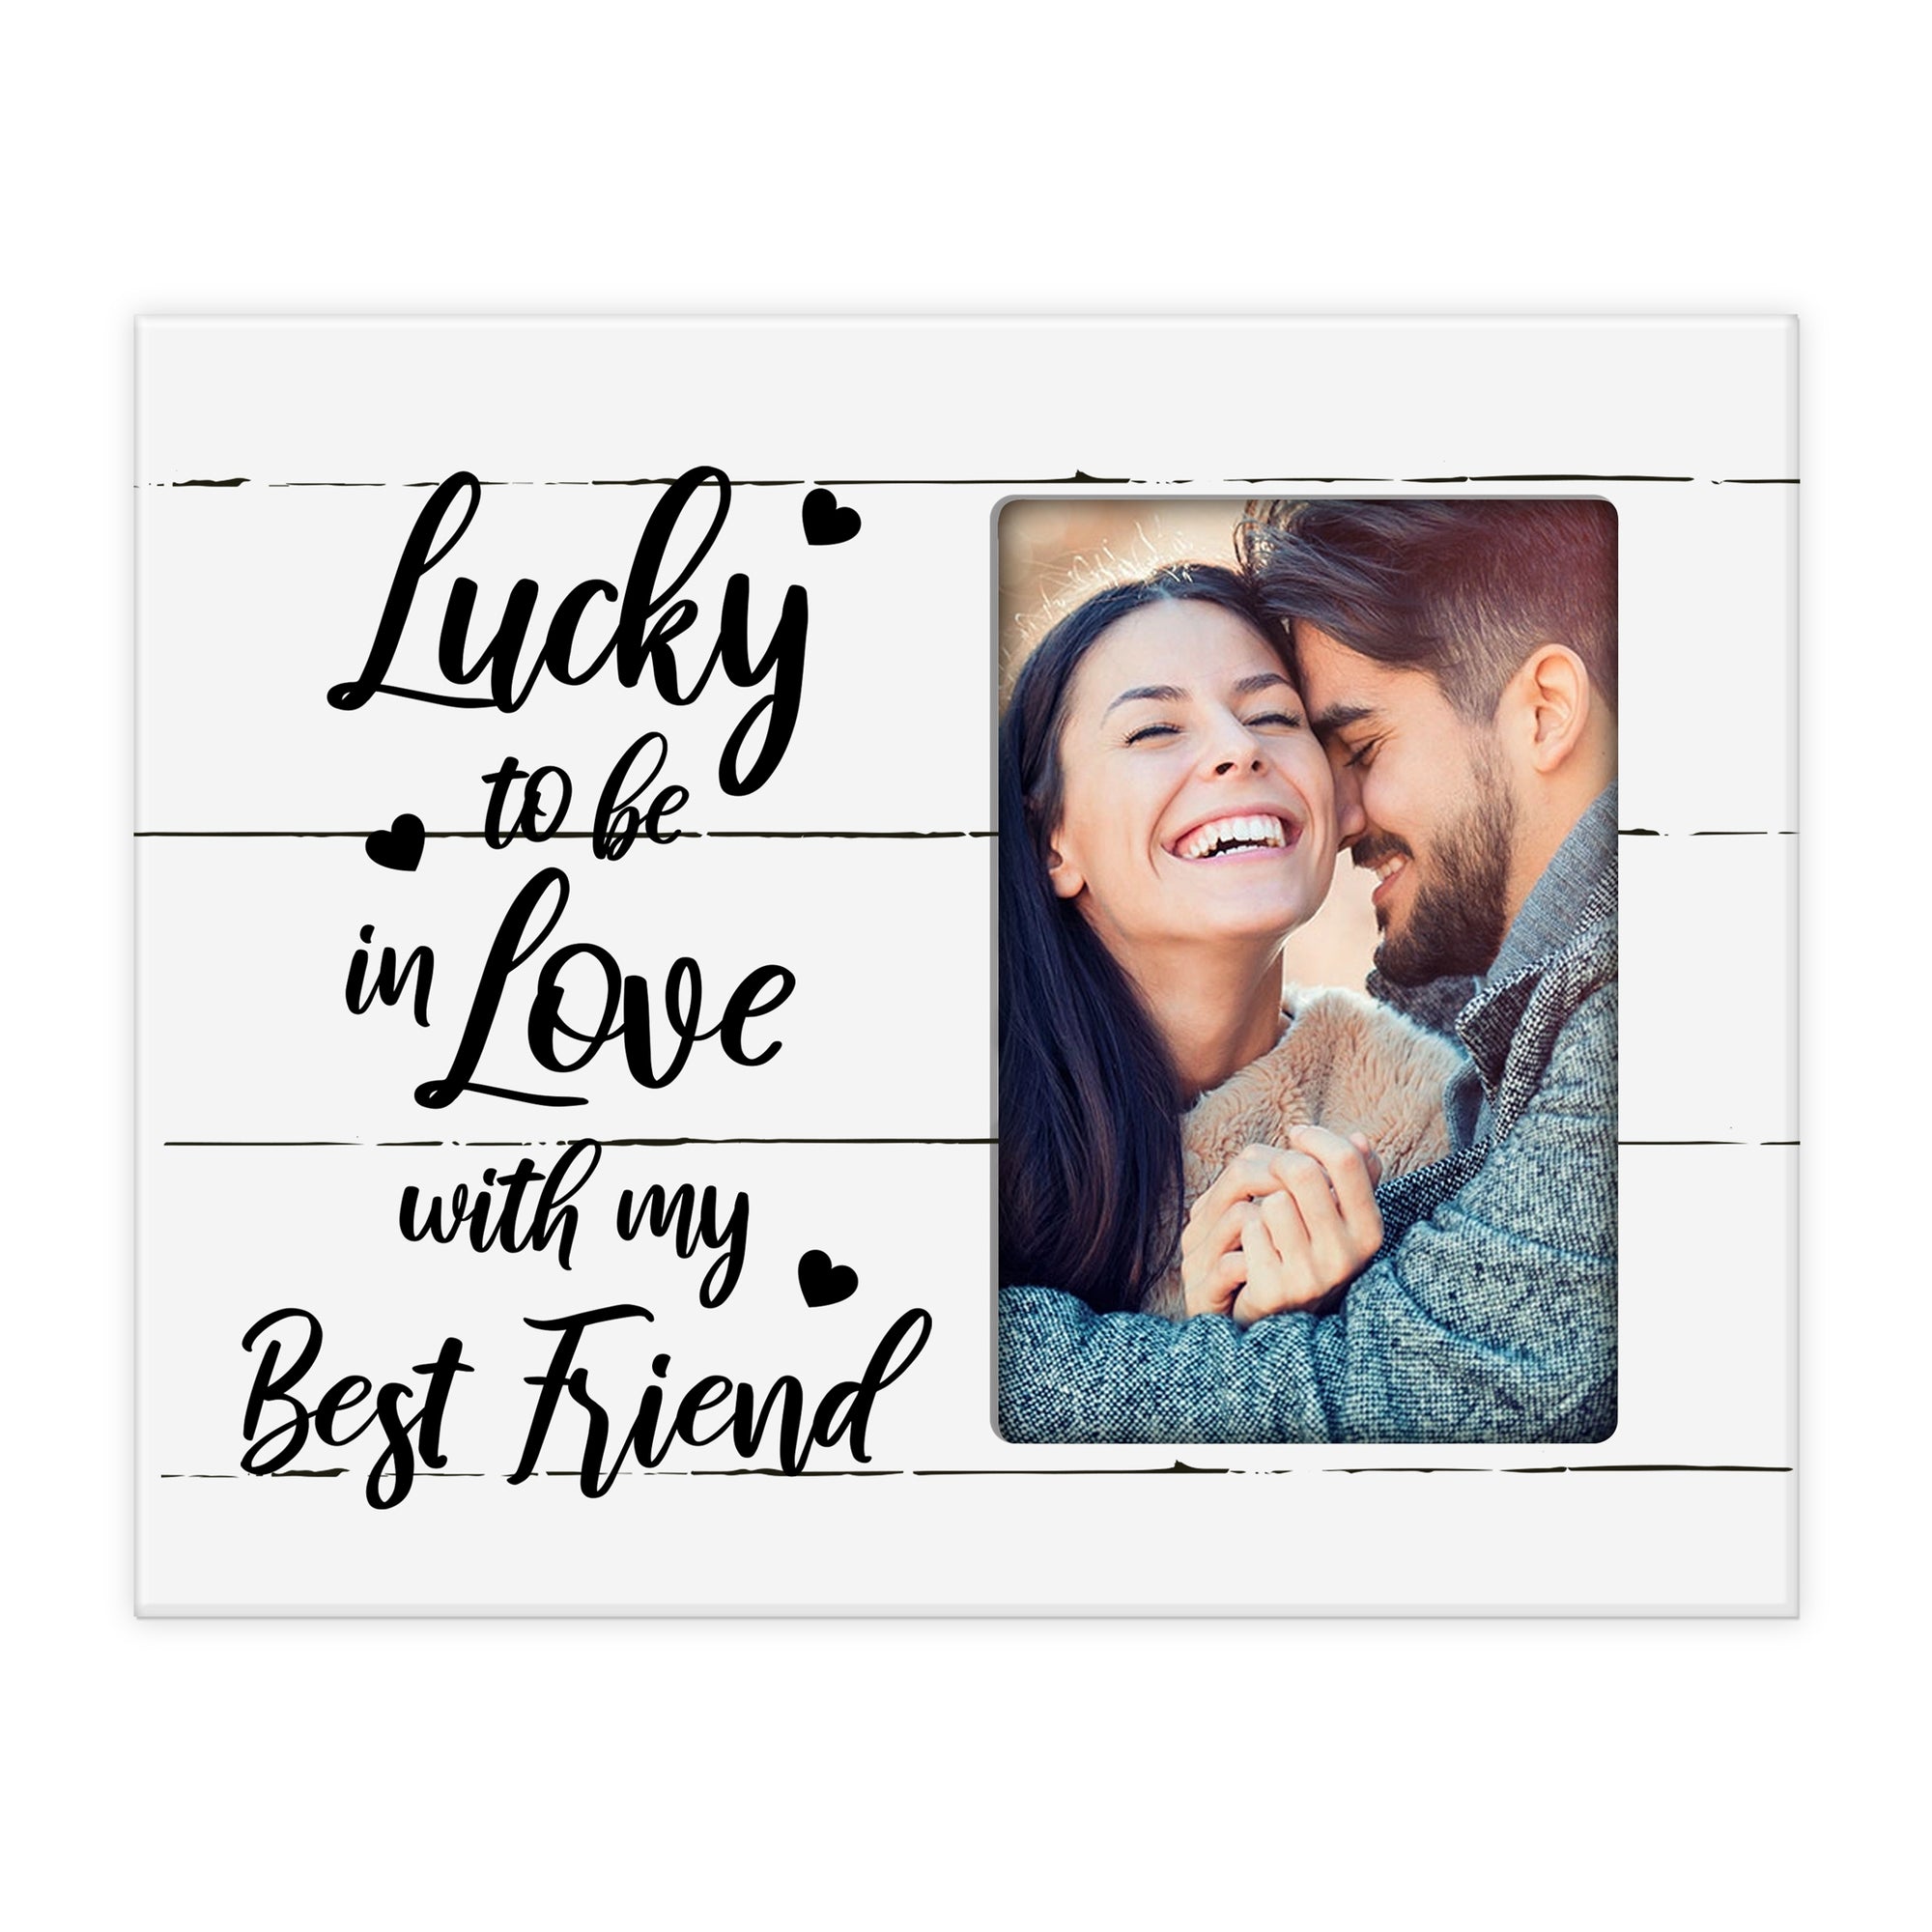 Wooden 8x10 Wedding Picture Frame Holds 4x6 Photo - Lucky To Be In Love